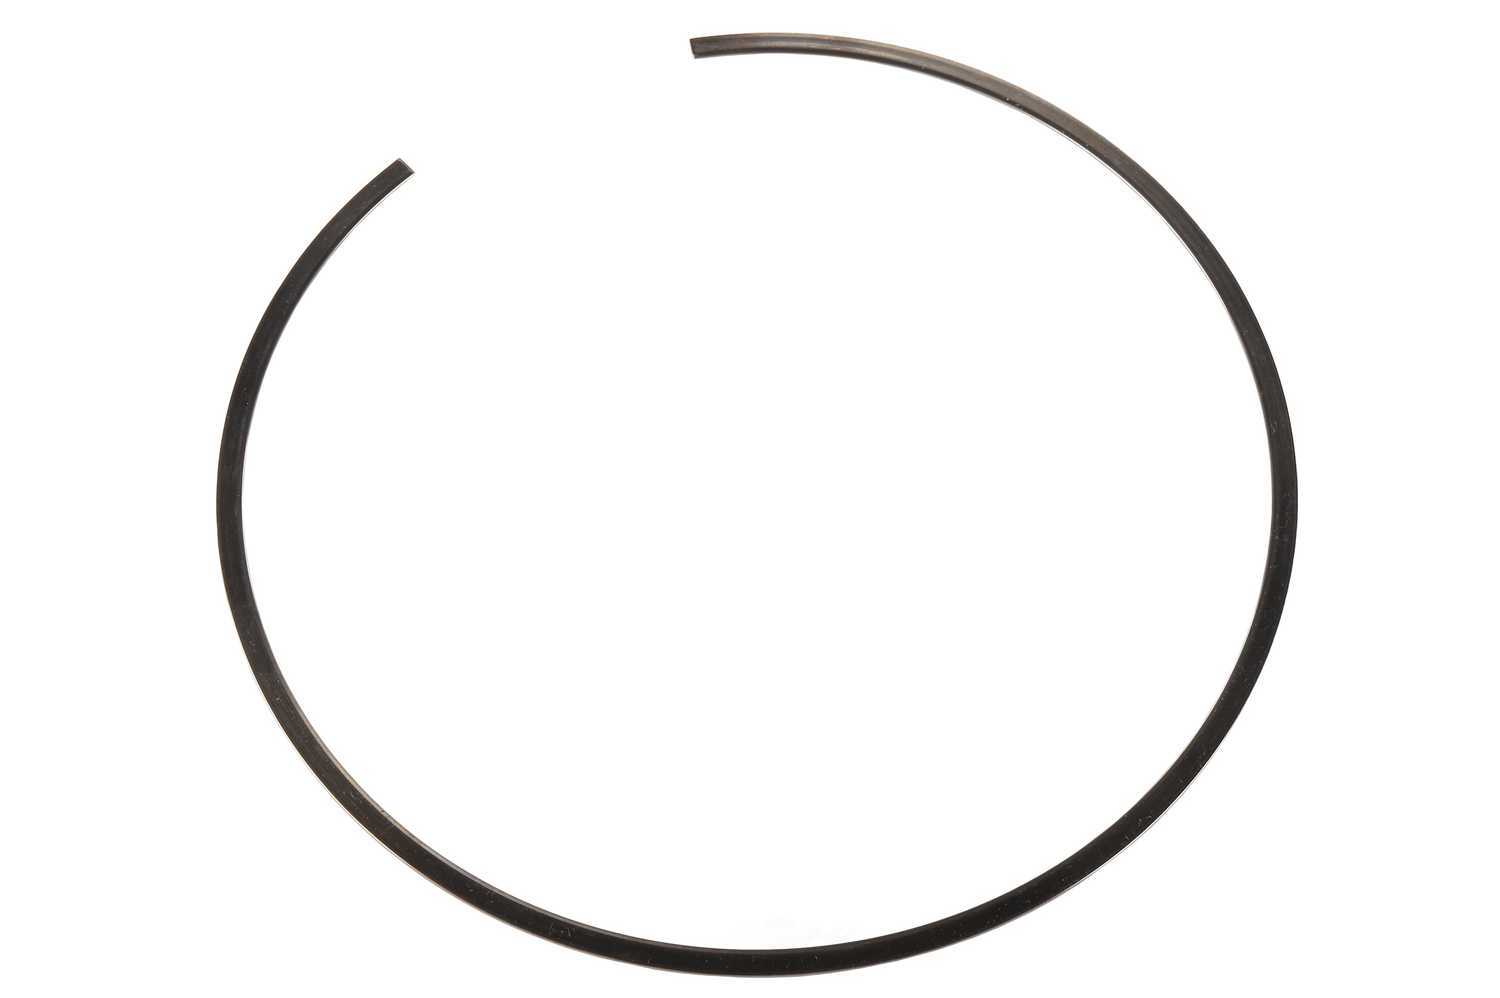 GM GENUINE PARTS - Automatic Transmission Clutch Spring Retaining Ring - GMP 24230730